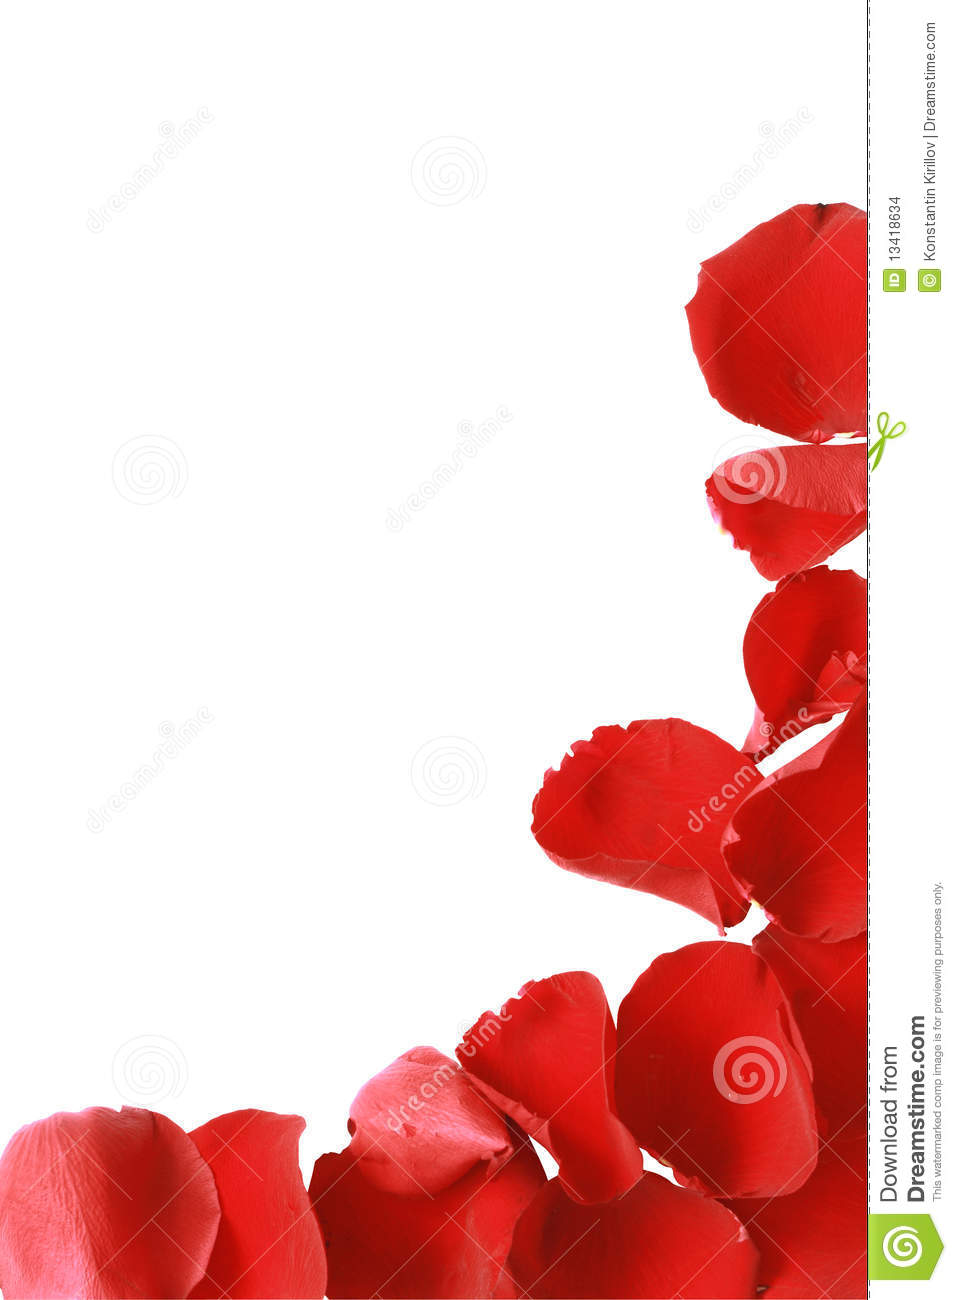 Border Made From Red Rose Petals Isolated On White Background With